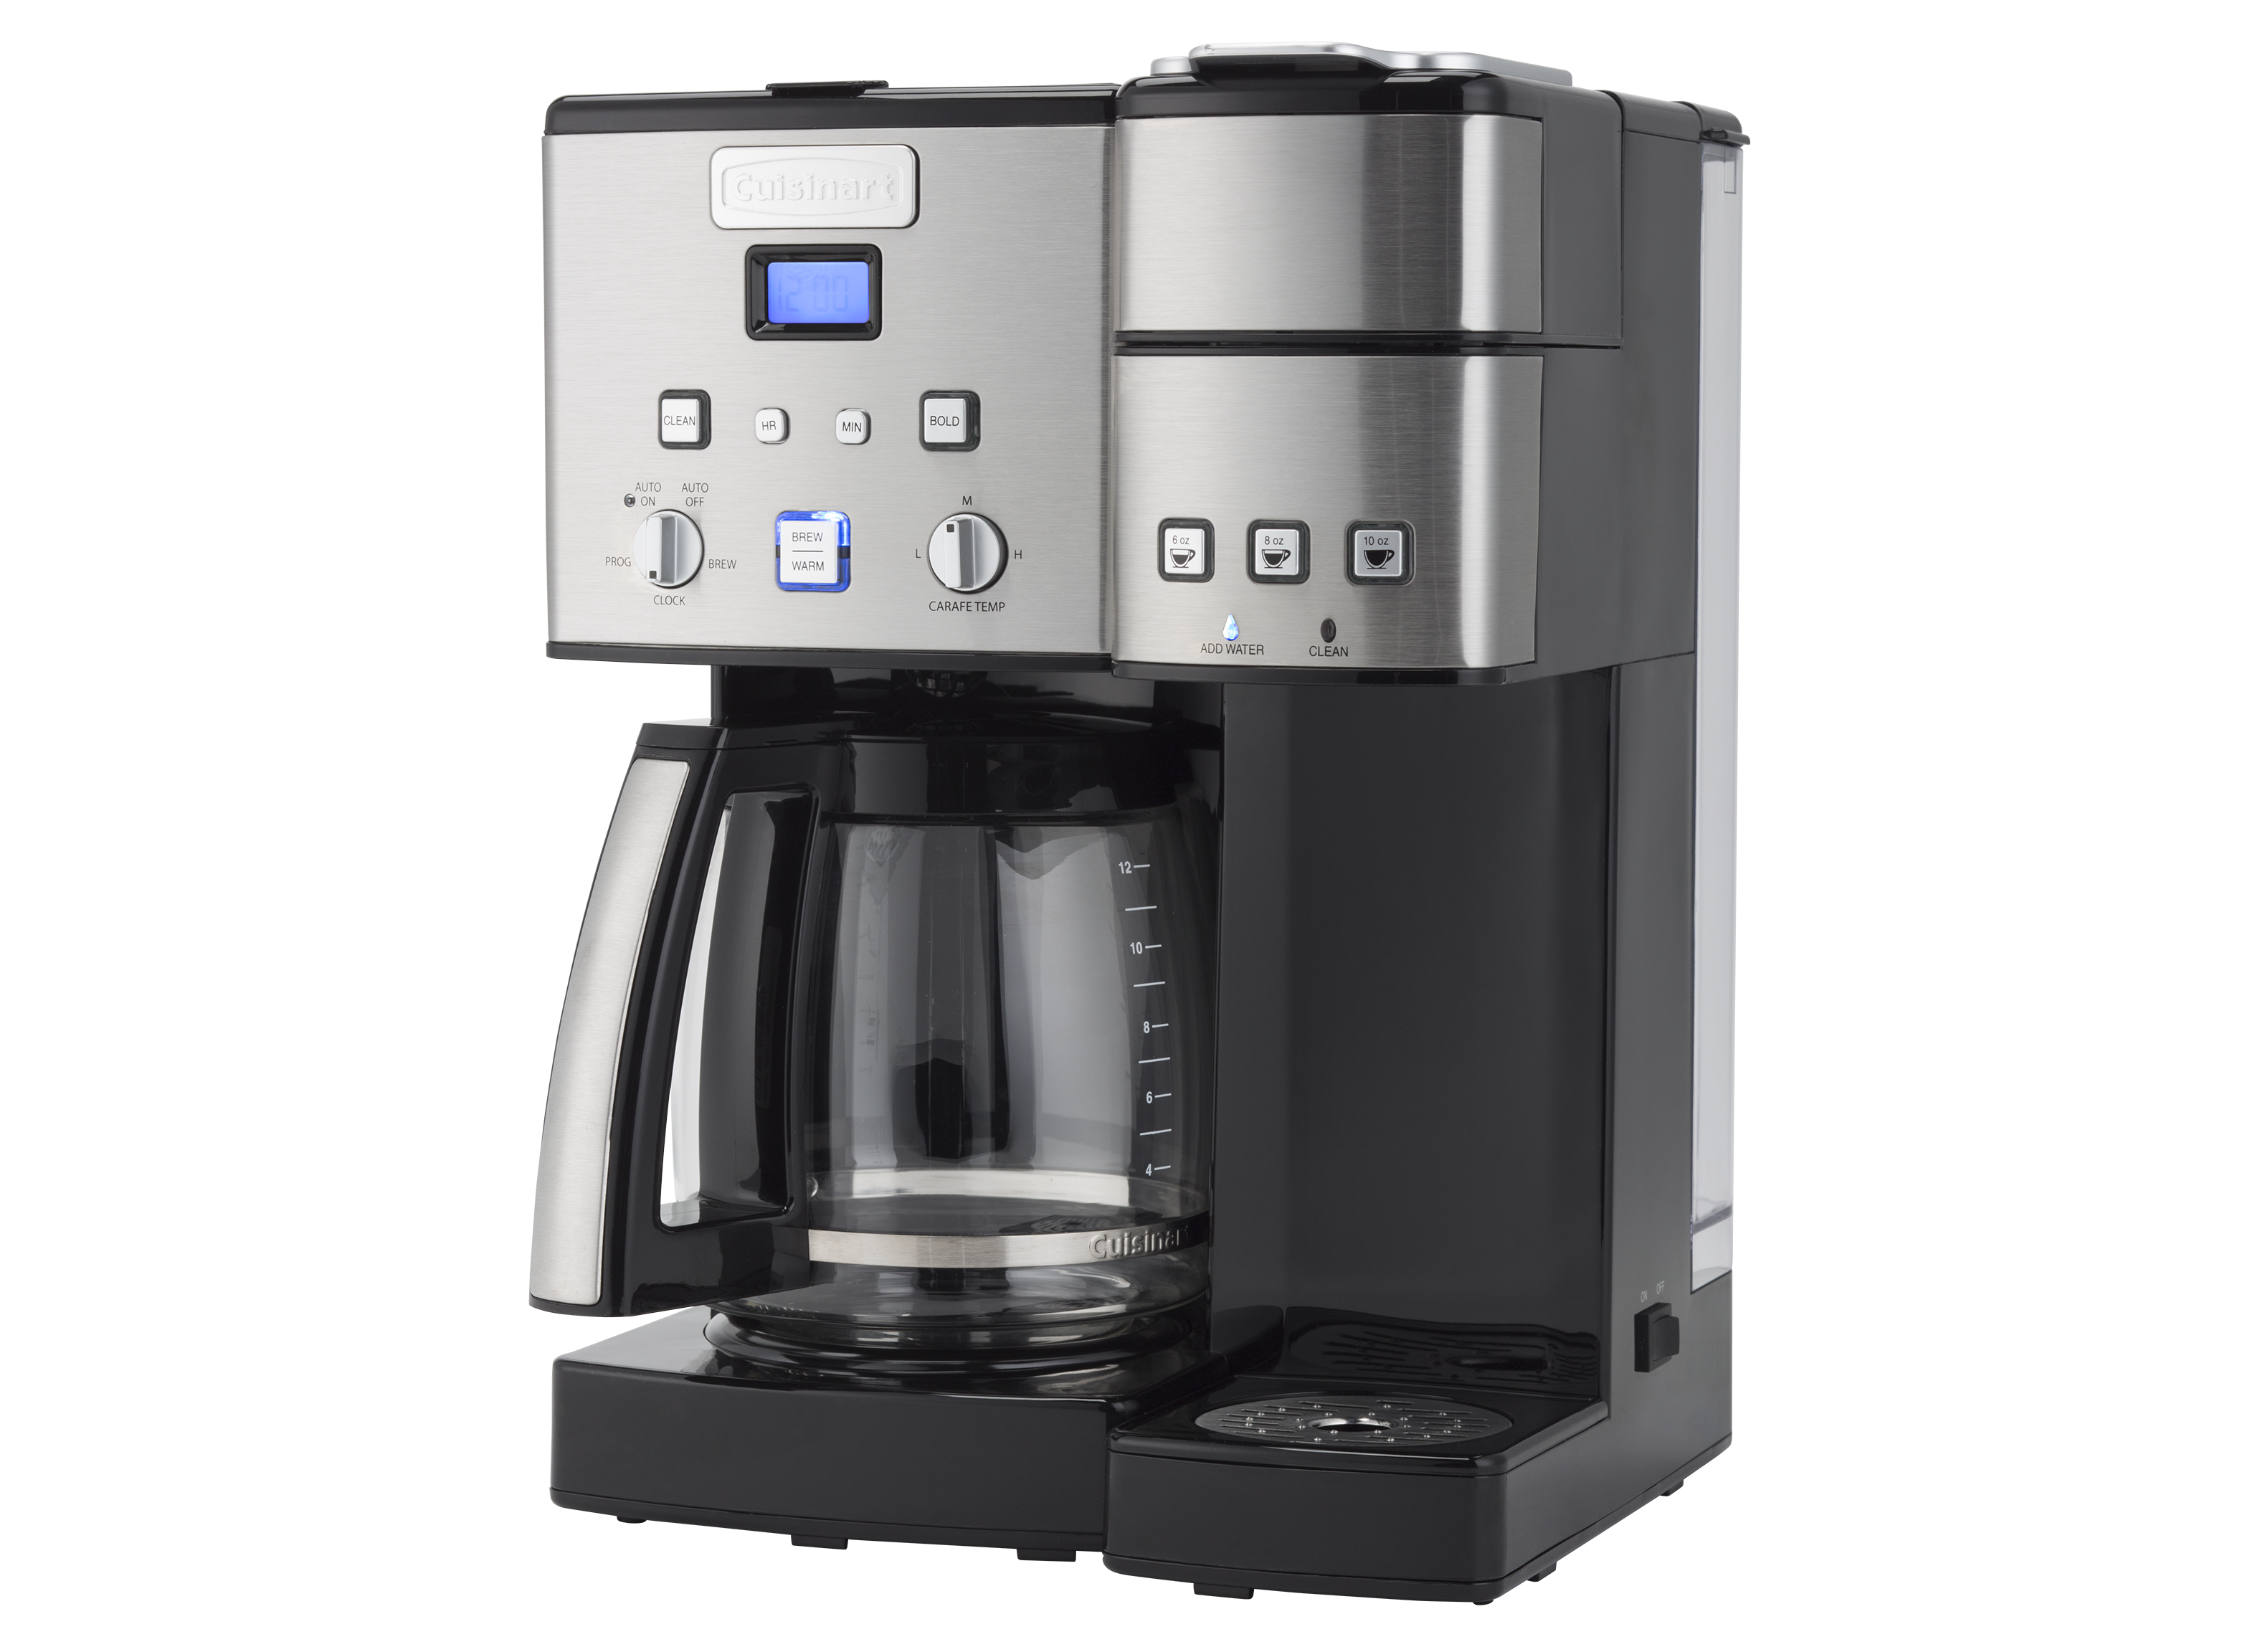 https://crdms.images.consumerreports.org/prod/products/cr/models/388210-coffeemakers-cuisinart-coffeecenterss15.png